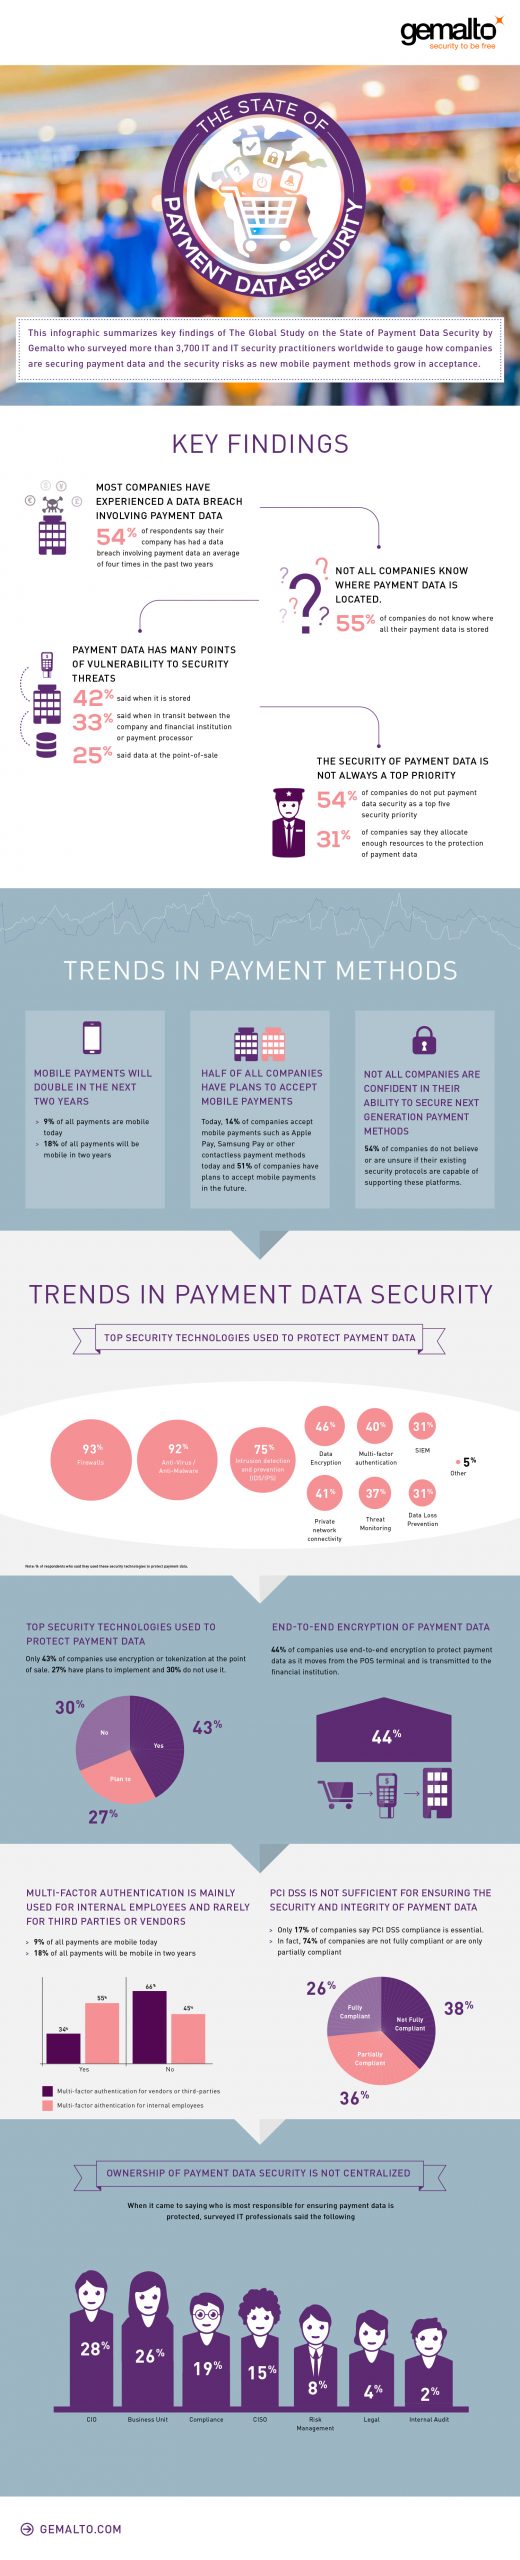 Payment Data Security